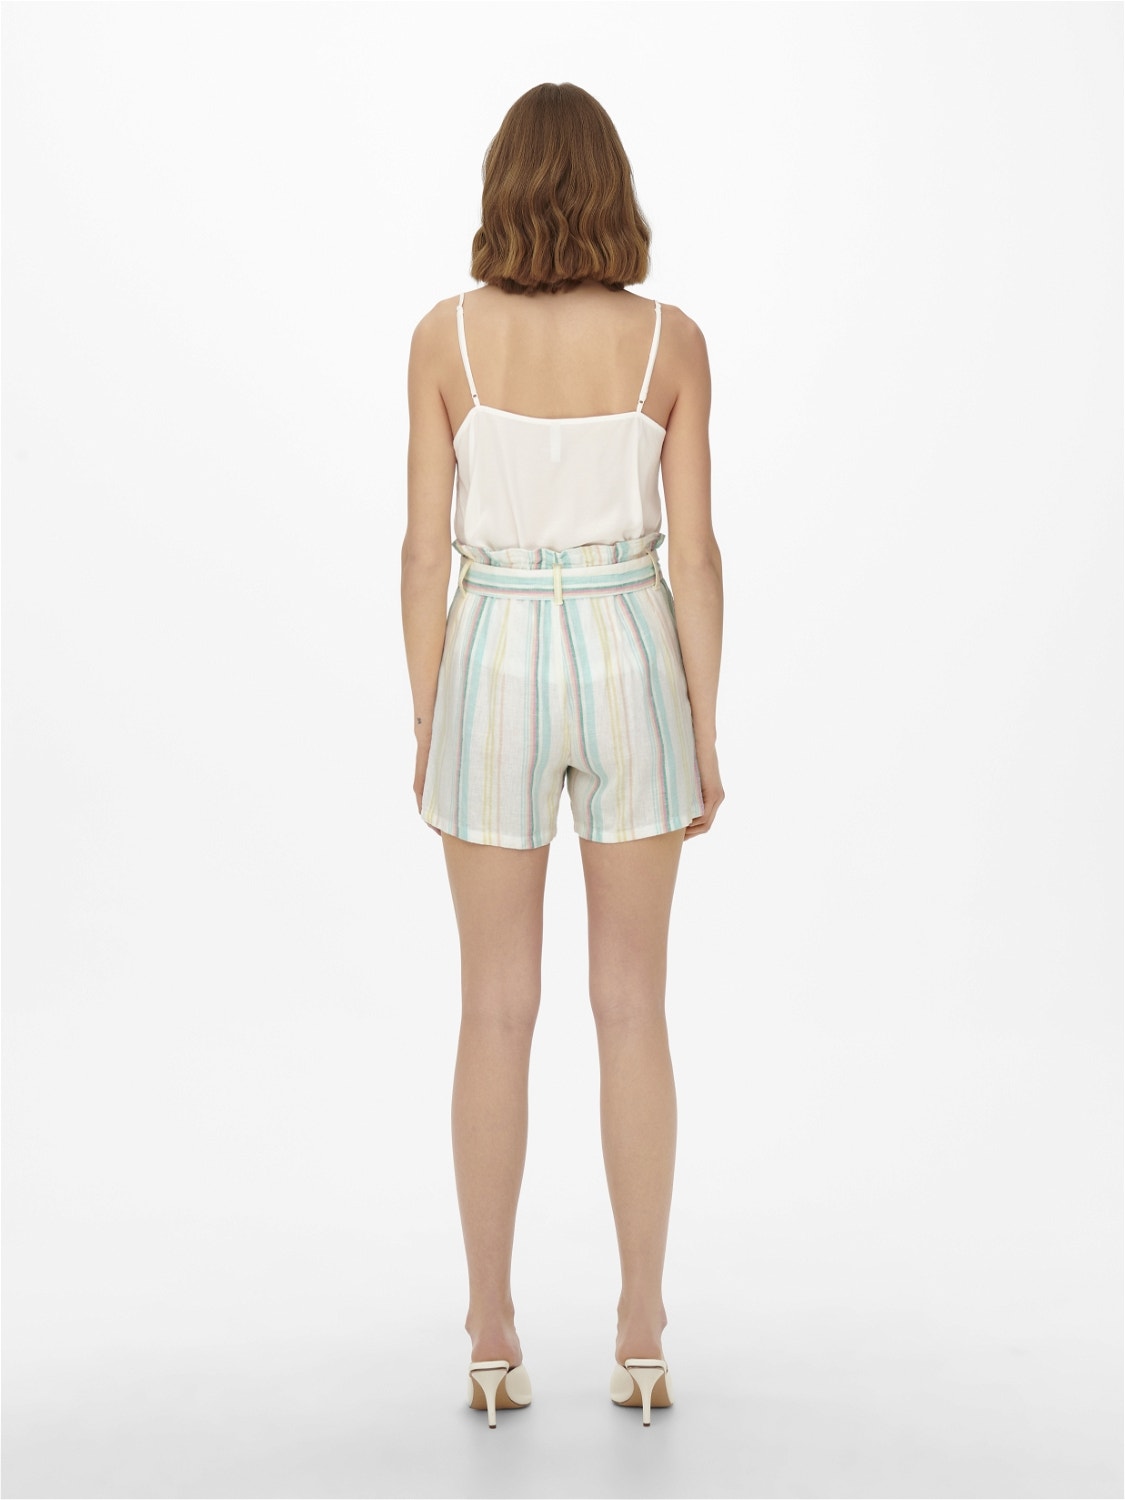 ONLY Hohe Taille Shorts -Cloud Dancer - 15256302